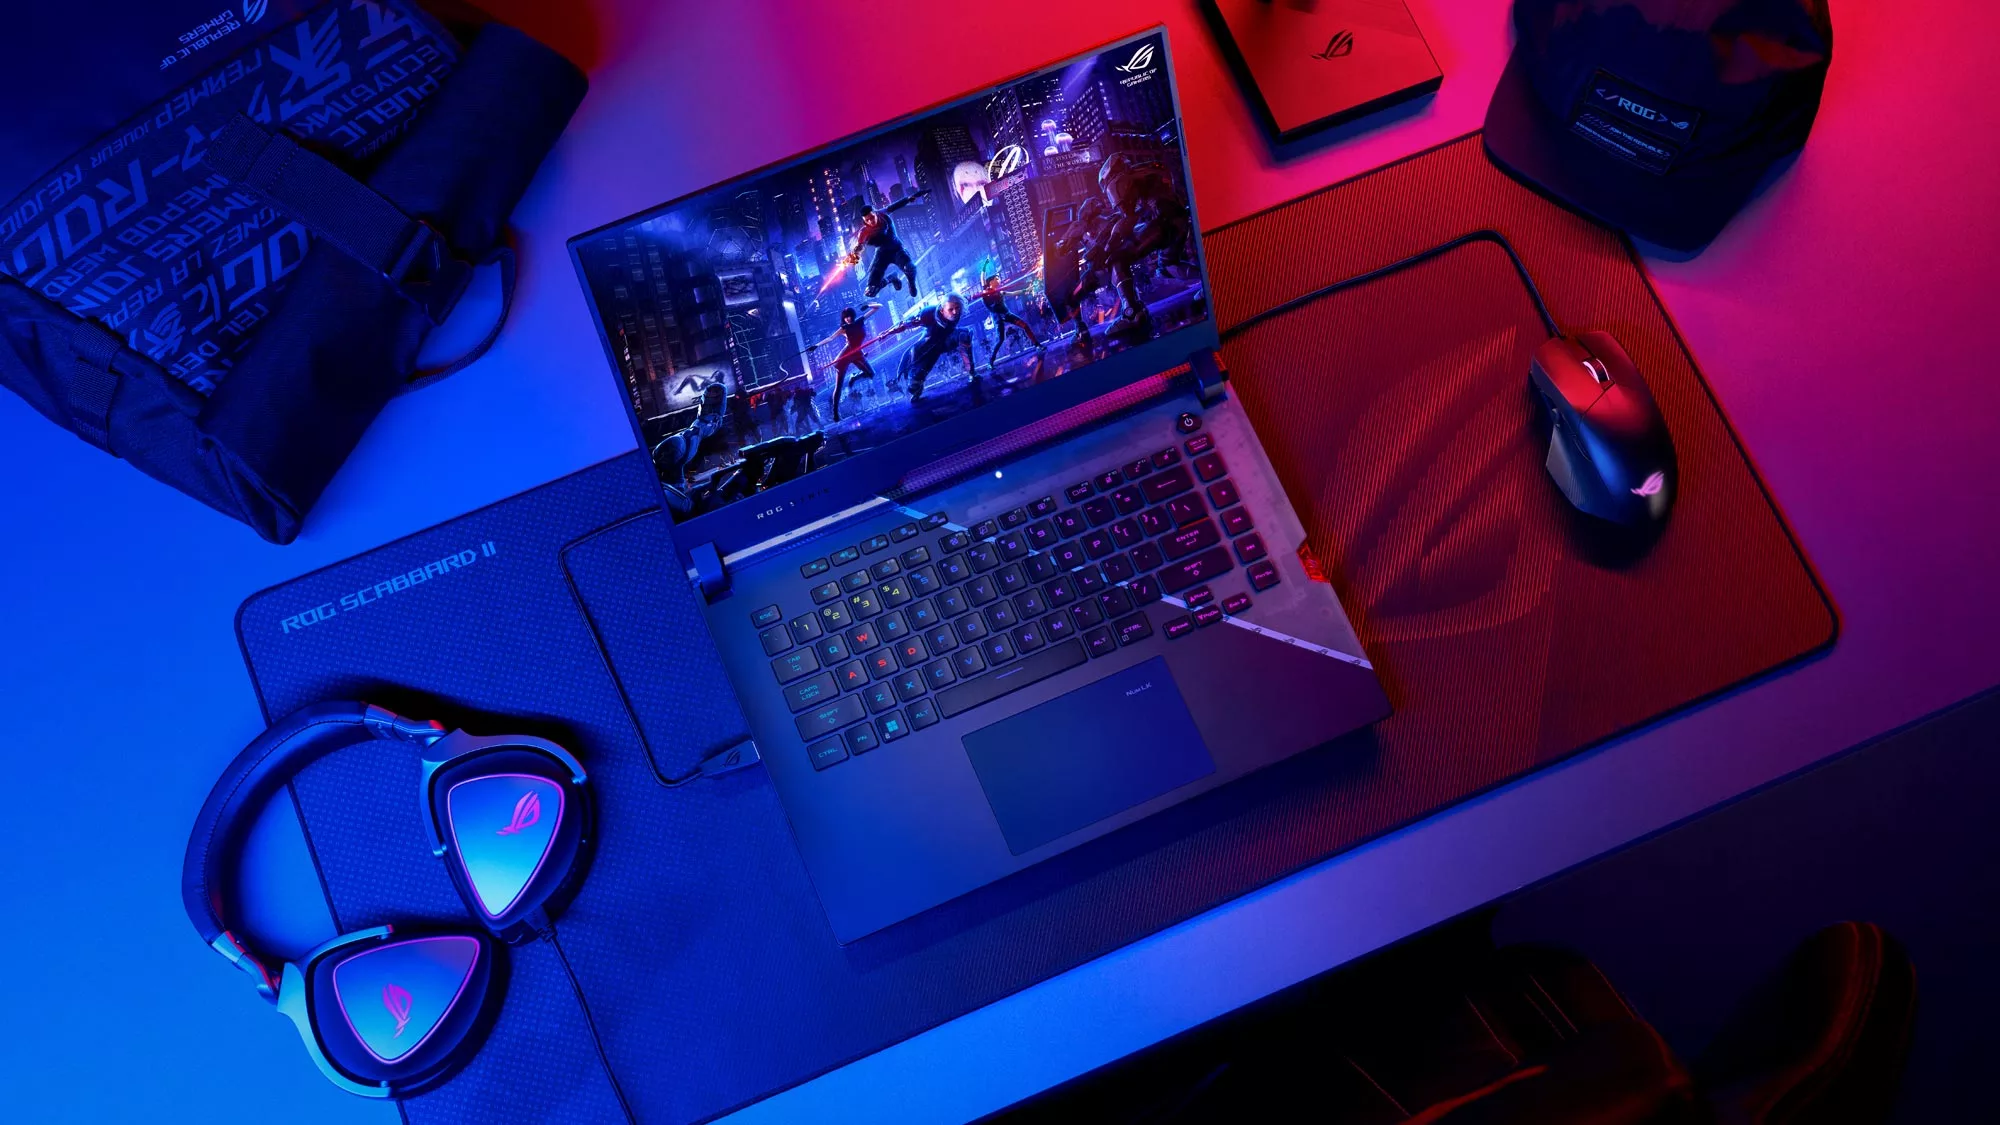 A photo of the ROG Strix SCAR laptop on a table next to a mouse and gaming headset.